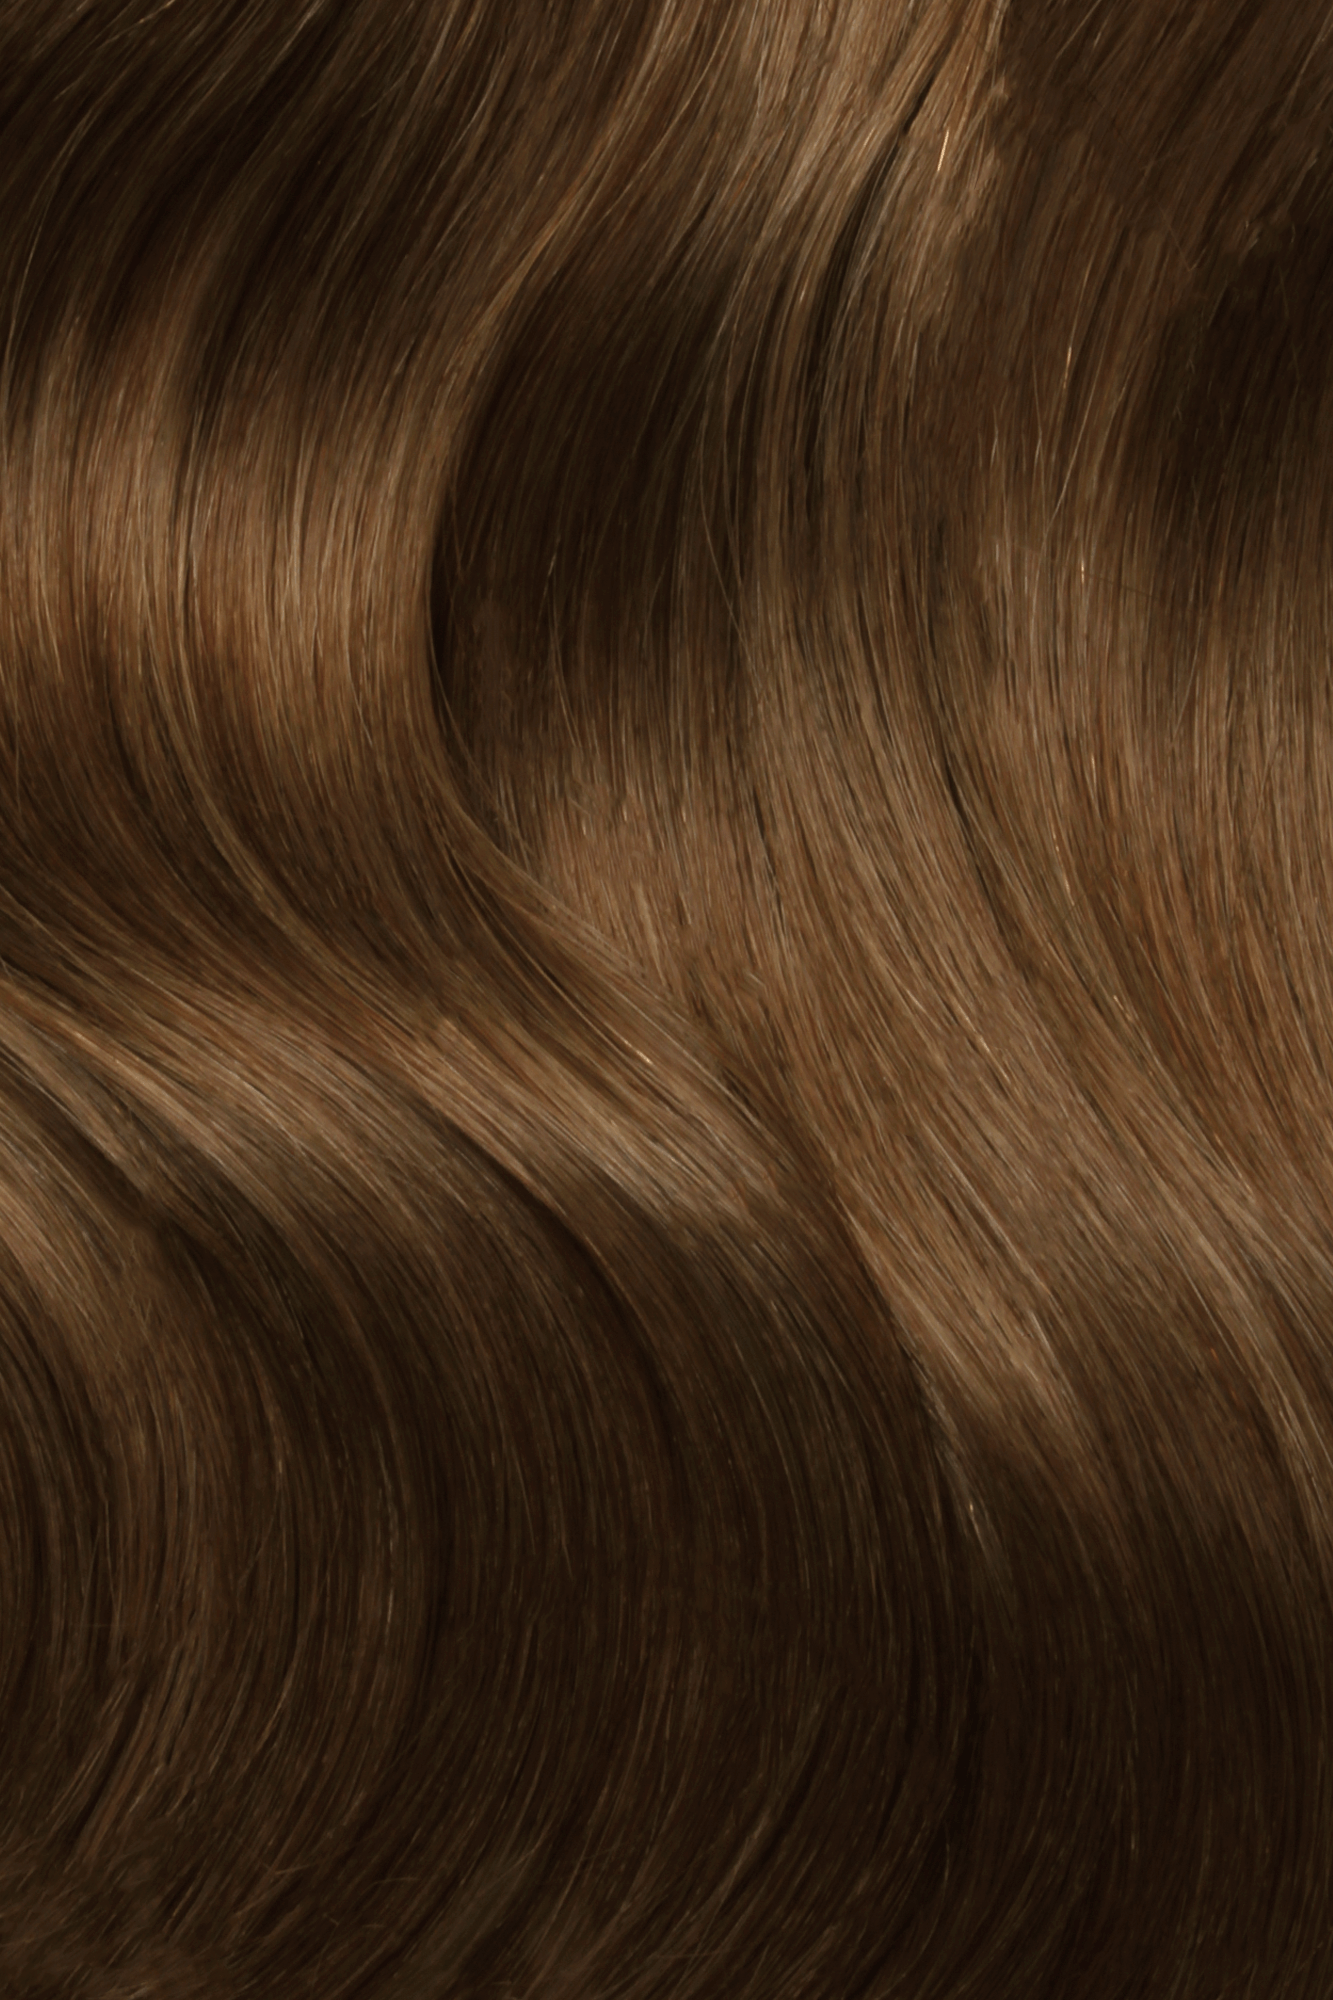 Tiny Tip Bonds 22&quot; - SWAY Hair Extensions Chestnut-Brown: Lightweight, discreet. Made with Italian Keratin for comfort and long-lasting wear. Reusable and compatible with other SWAY Salon Professional Methods